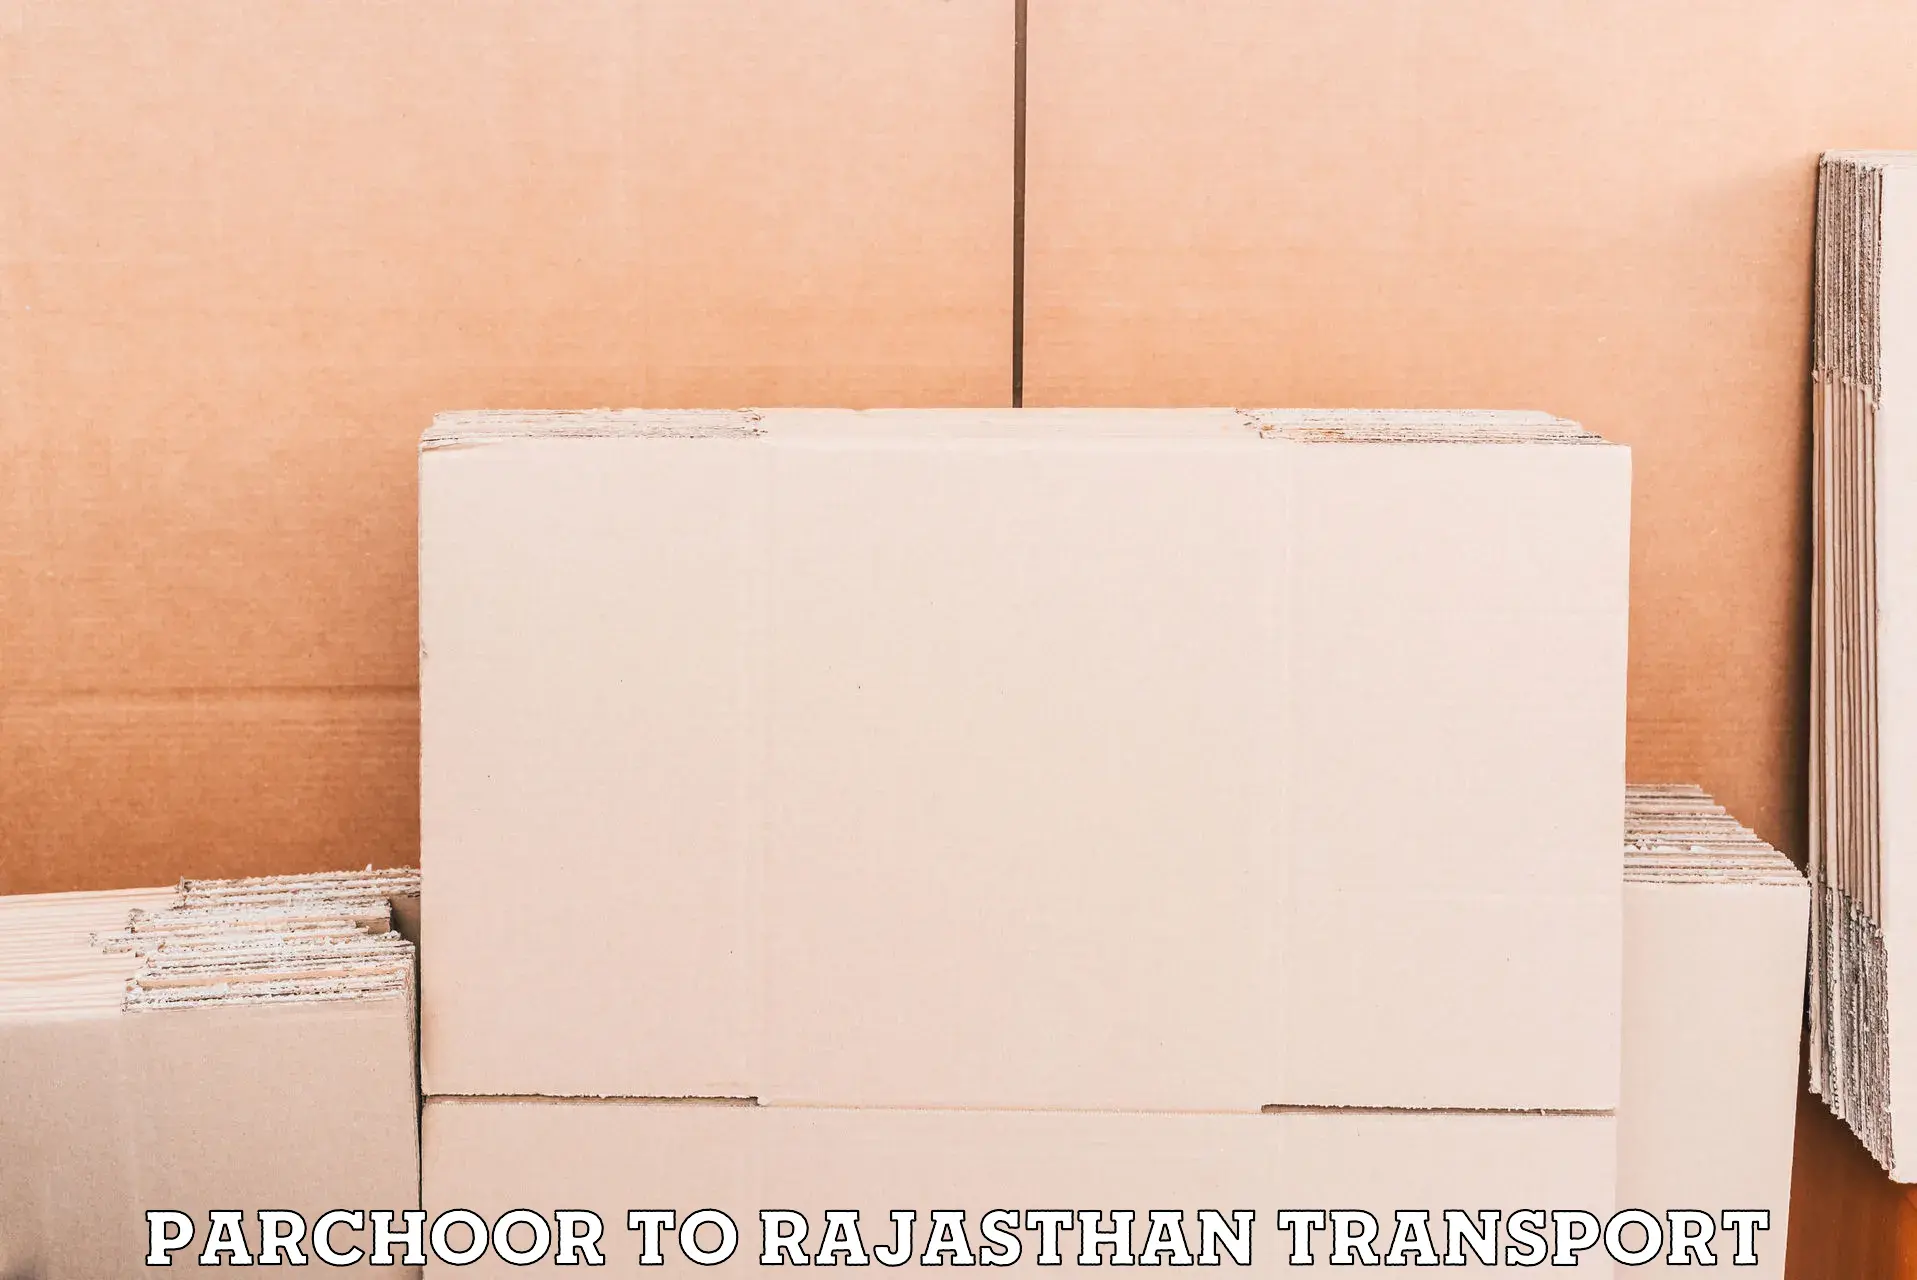 Container transport service in Parchoor to Yeswanthapur